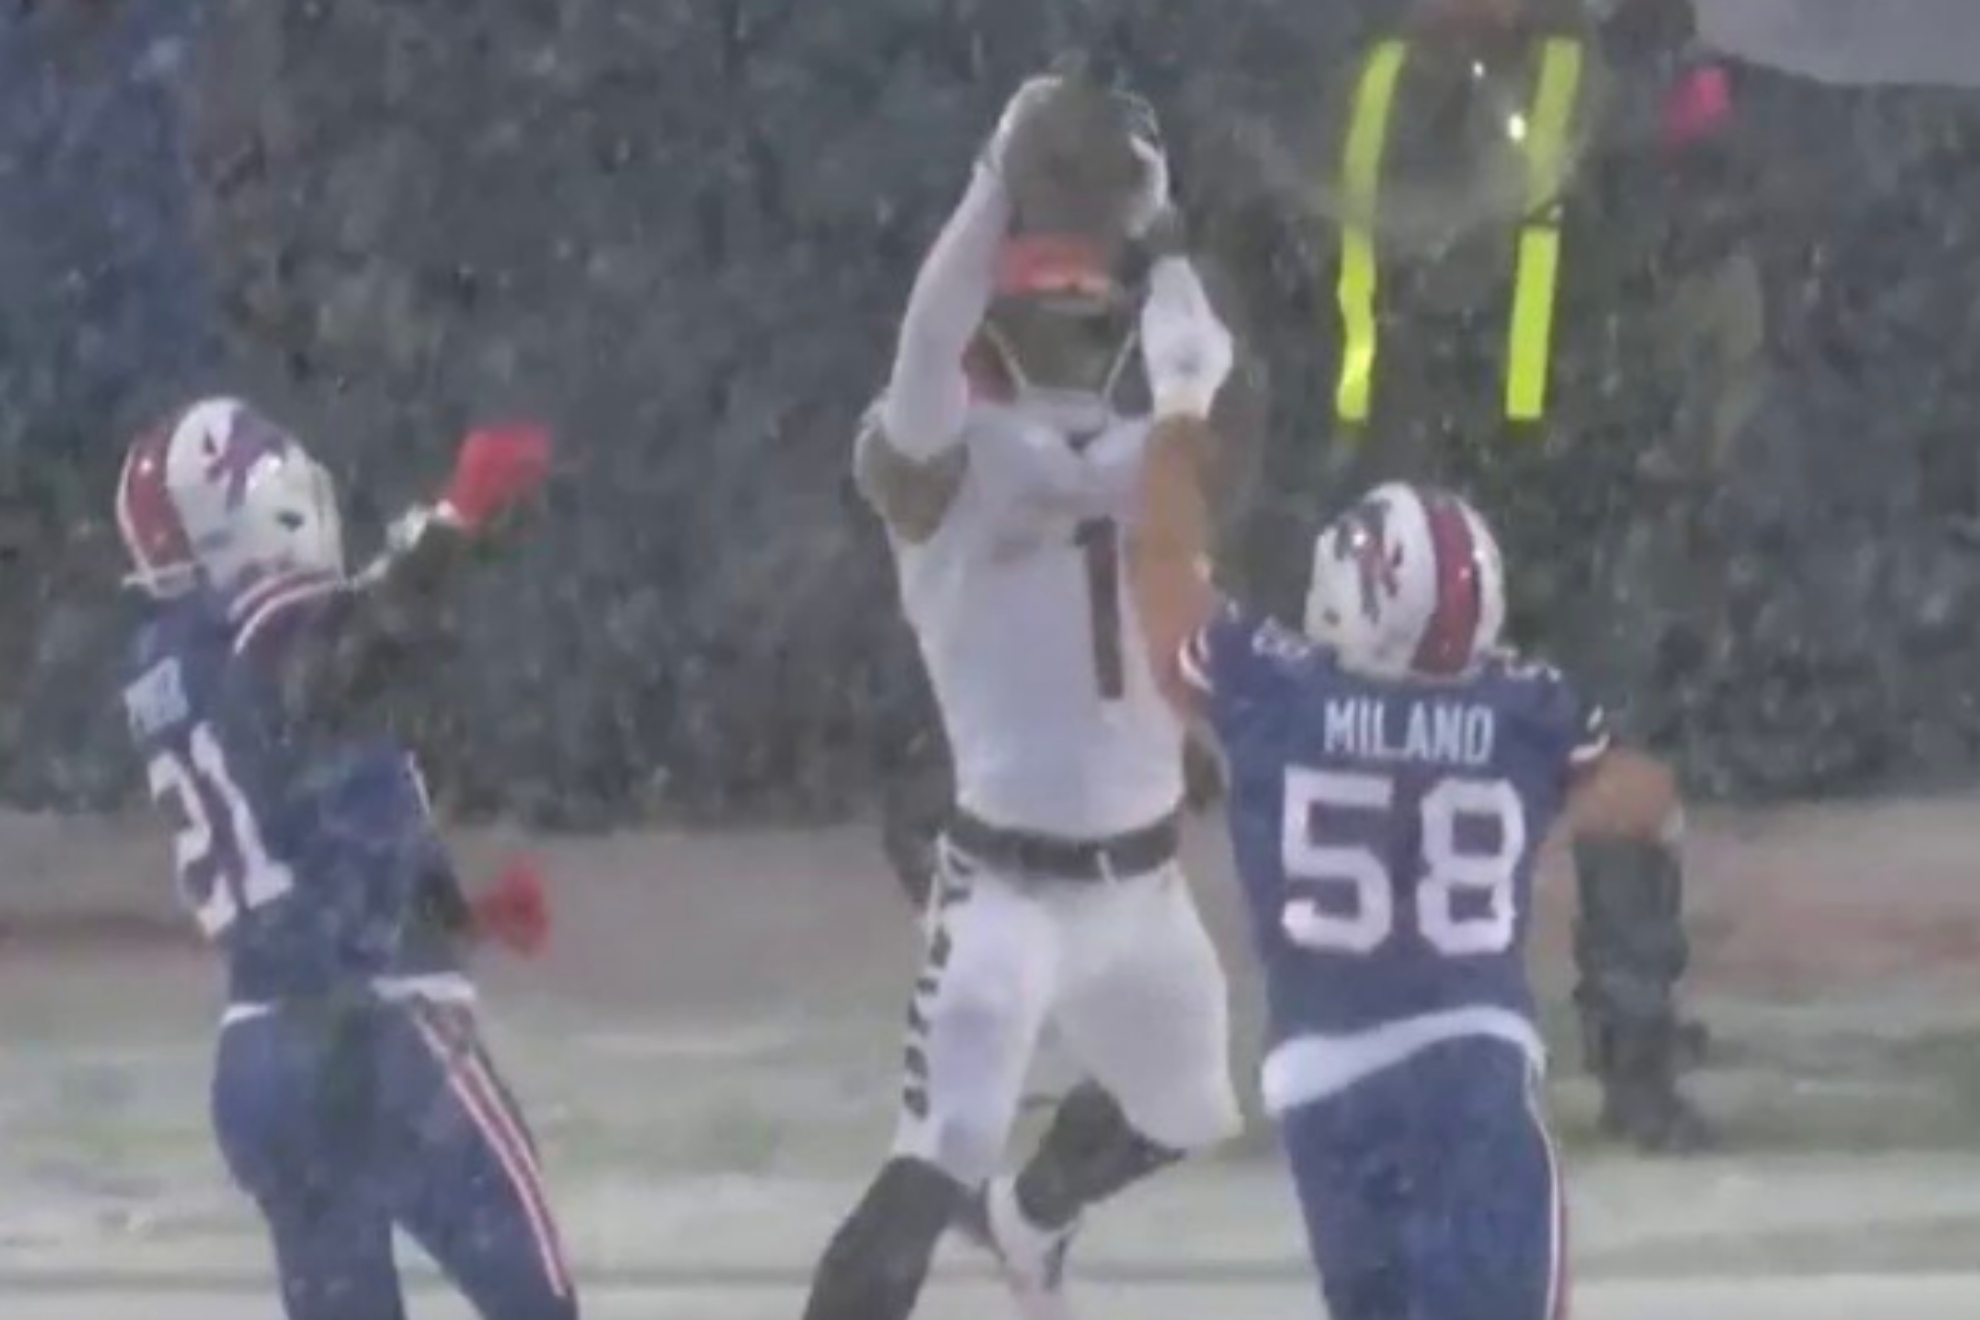 Cincinnati Bengals 3rd touchdown attempt vs Bills sparks controversy over referee's decision